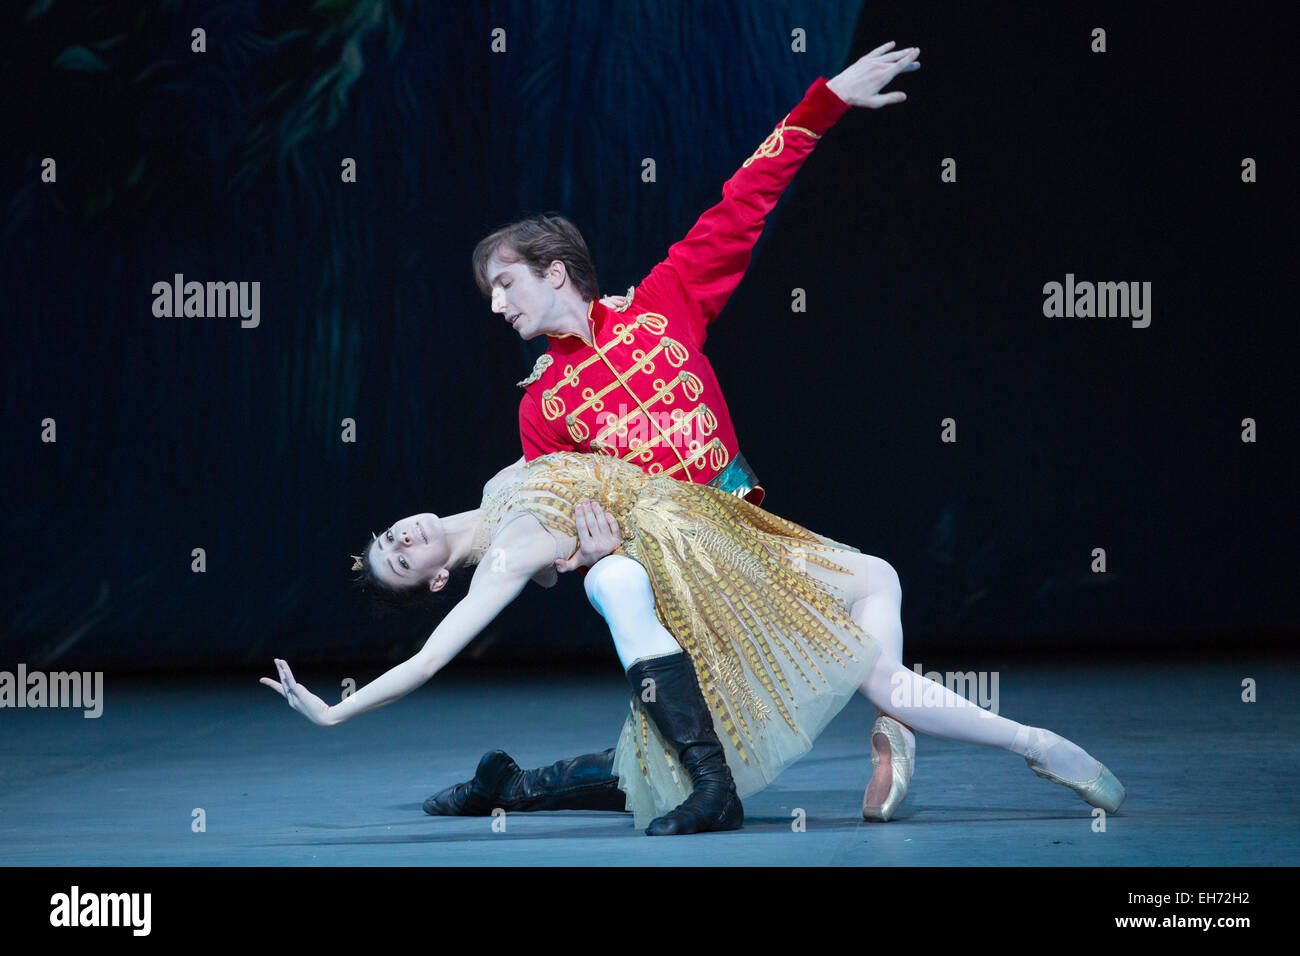 London, UK. 8 March 2015. Cinderella performed by Maia Makhateli and Artur Shesterikov to music by Prokofiev with a choregraphy by Christopher Wheeldon. The Russian Ballet Icons Gala 2015, a gala evening dedicated to the story of Russian ballet, is held on 8 March 2015 at the London Coliseum. 30 dancers, including Natalia Osipova, Xander Parish and Alina Cojocaru take part. The gala features excerps from Russian classical repertoire and masterpieces by contemporary choreographers influenced by the Russian ballet. Accompanied by the orchestra of the English National Ballet under the direction o Stock Photo